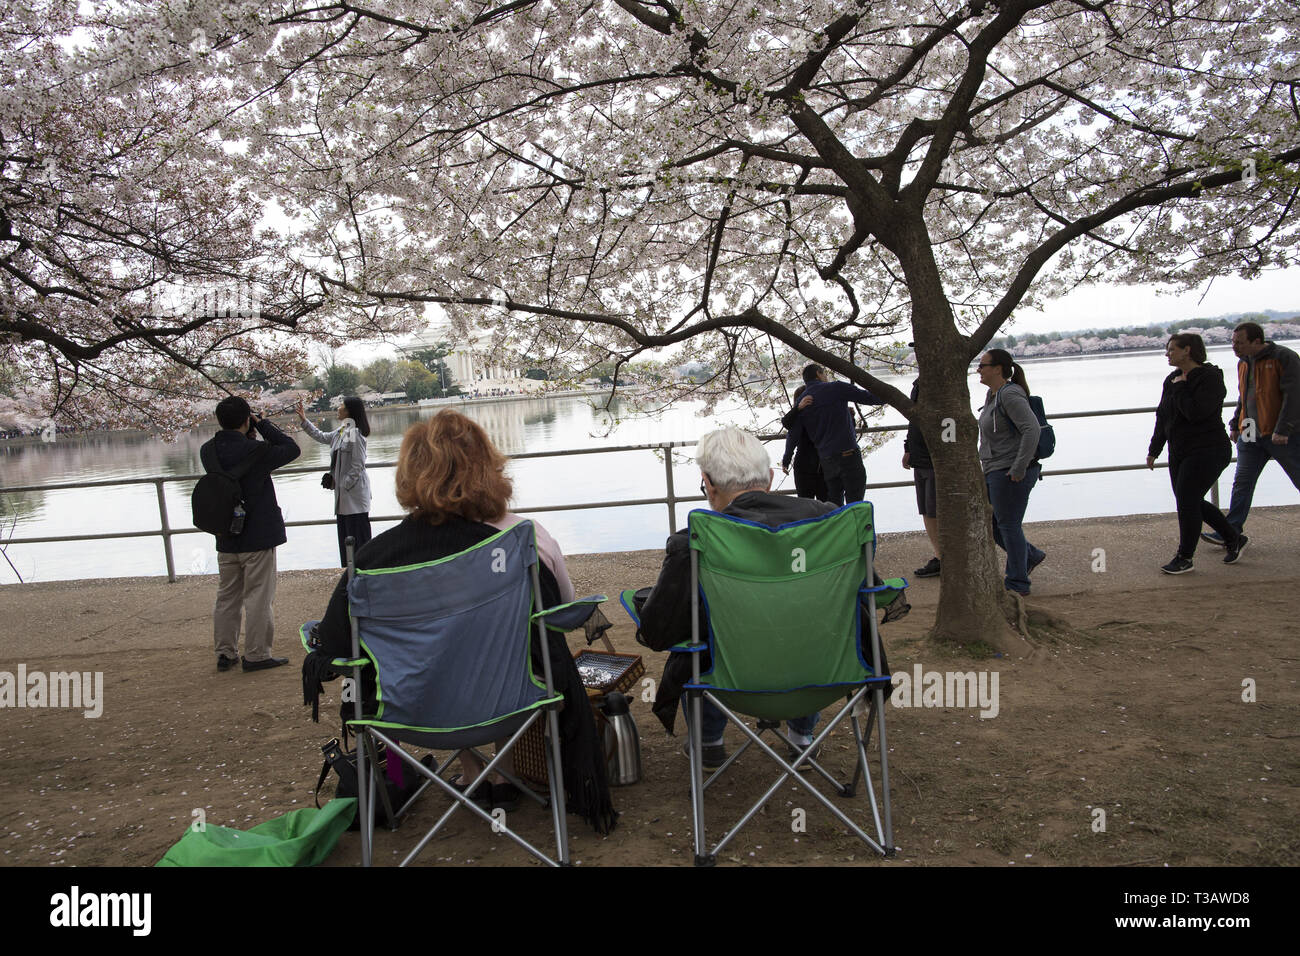 Washington, District of Columbia, U.S.A. 7th Apr, 2019. Cherry trees are in full bloom as visitors enjoy cherry blossoms during 'National Cherry Blossom Festival ' at Tidal Basin on April 7, 2019 in Washington, DC, United States. The National Cherry Blossom Festival commemorates 3,000 cherry trees arrived in Washington in 1912 after coordination between the governments of United States and Japan. Credit: Probal Rashid/ZUMA Wire/Alamy Live News Stock Photo